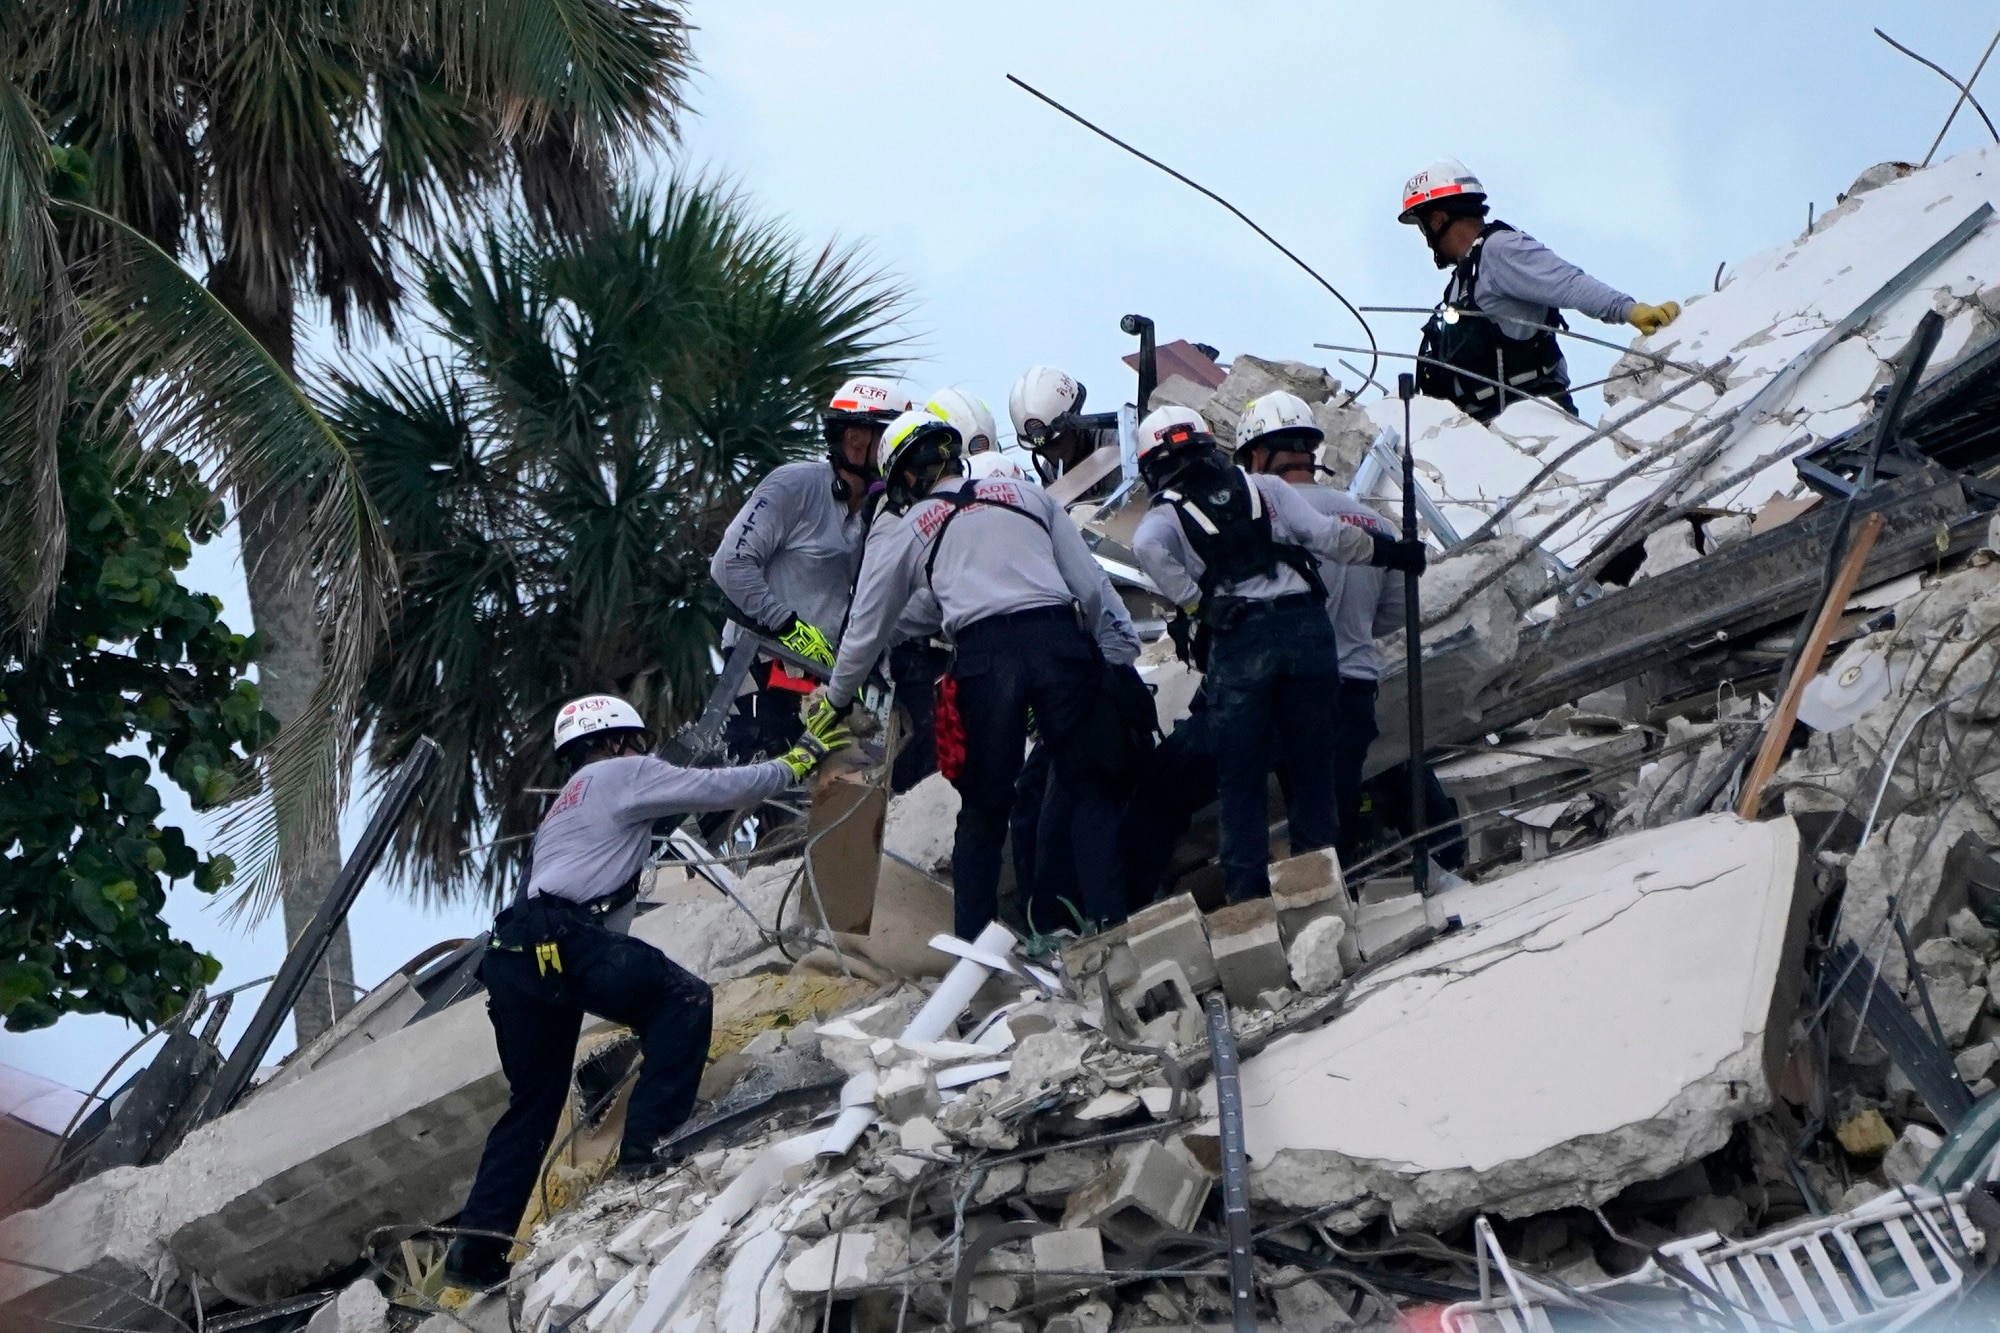 Rescue workers look through the rubble.